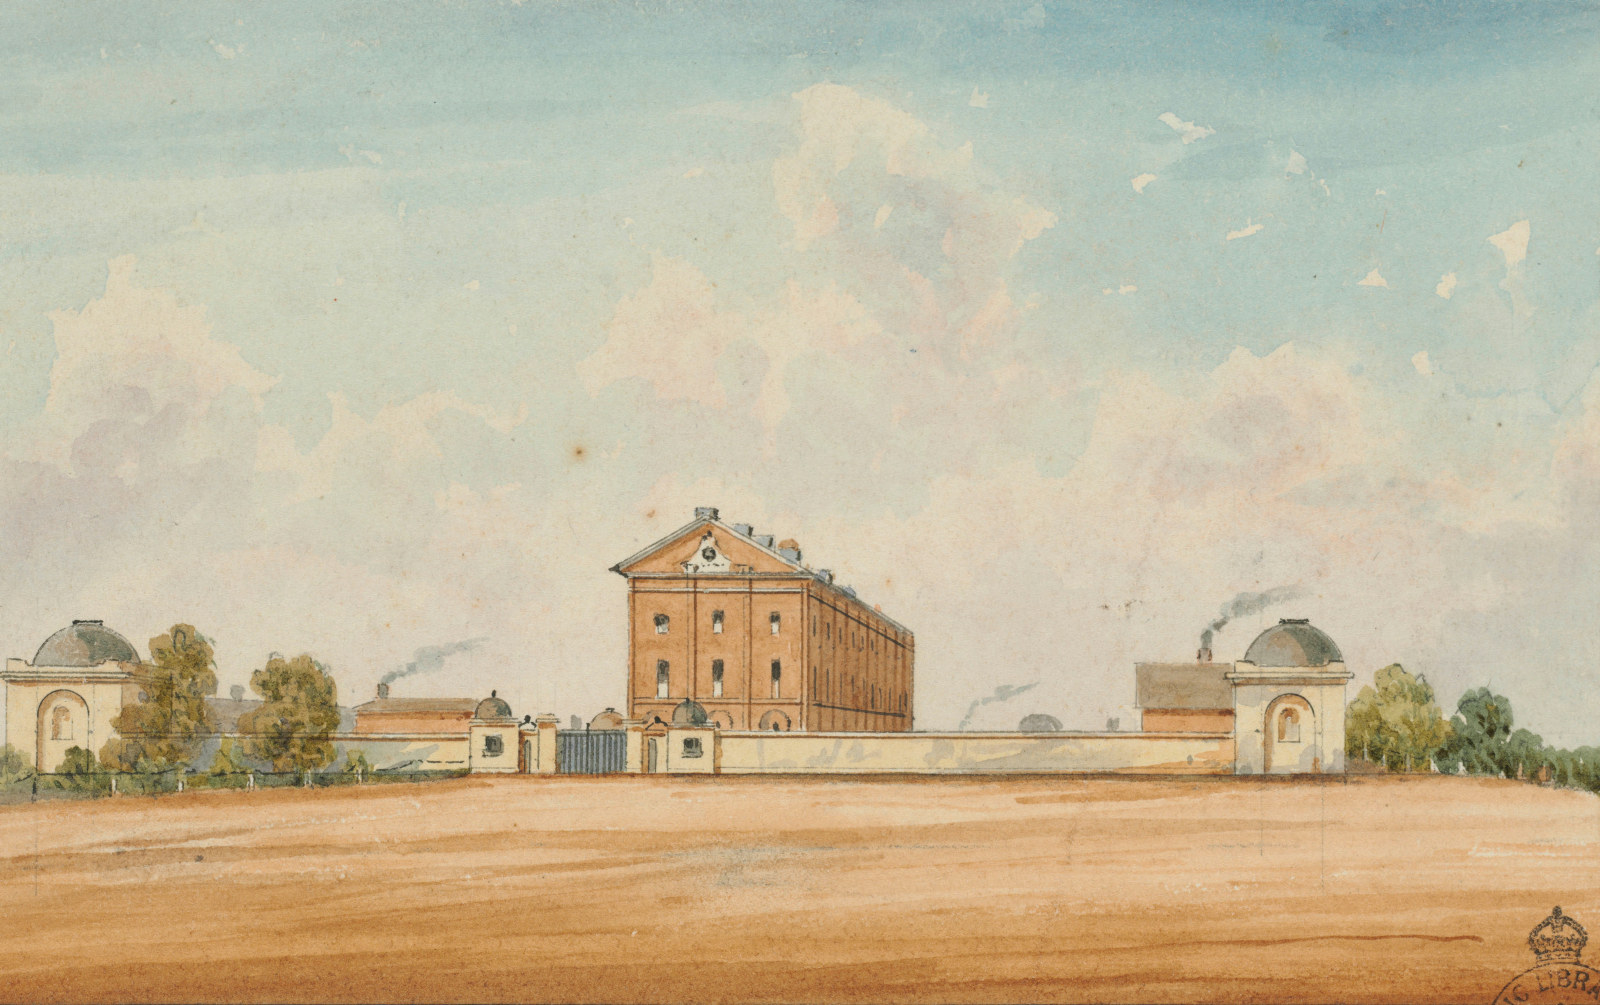 Water colour of the Hyde Park barracks showing front wall and gates. Smoke can be seen coming out of chimneys on either side of the 3 story brick barracks building.